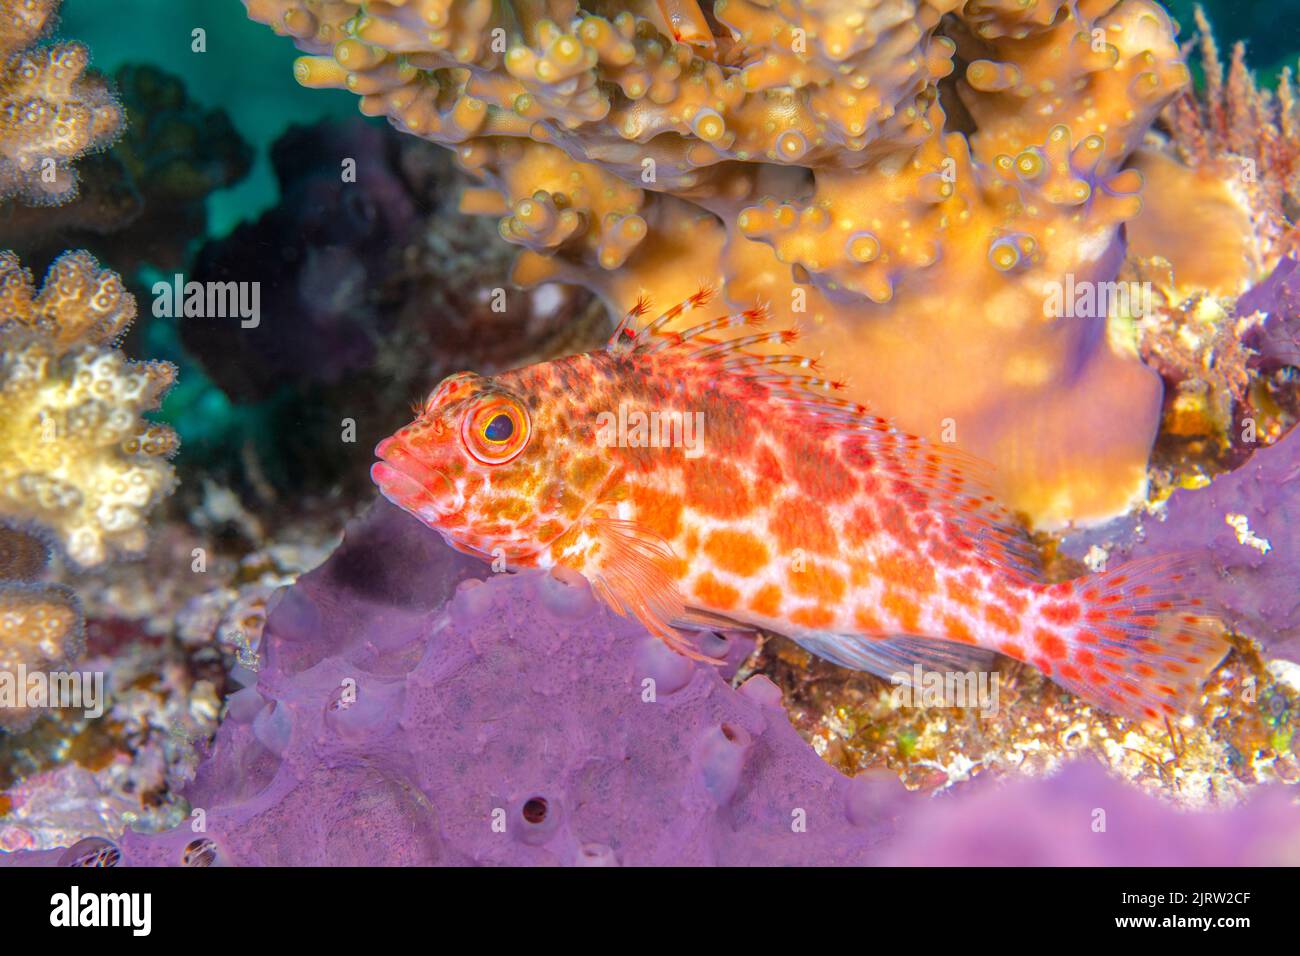 A hawkfish rests on some purple sponge on a reef in Fiji. waiting to ambush a small crab for food. Stock Photo